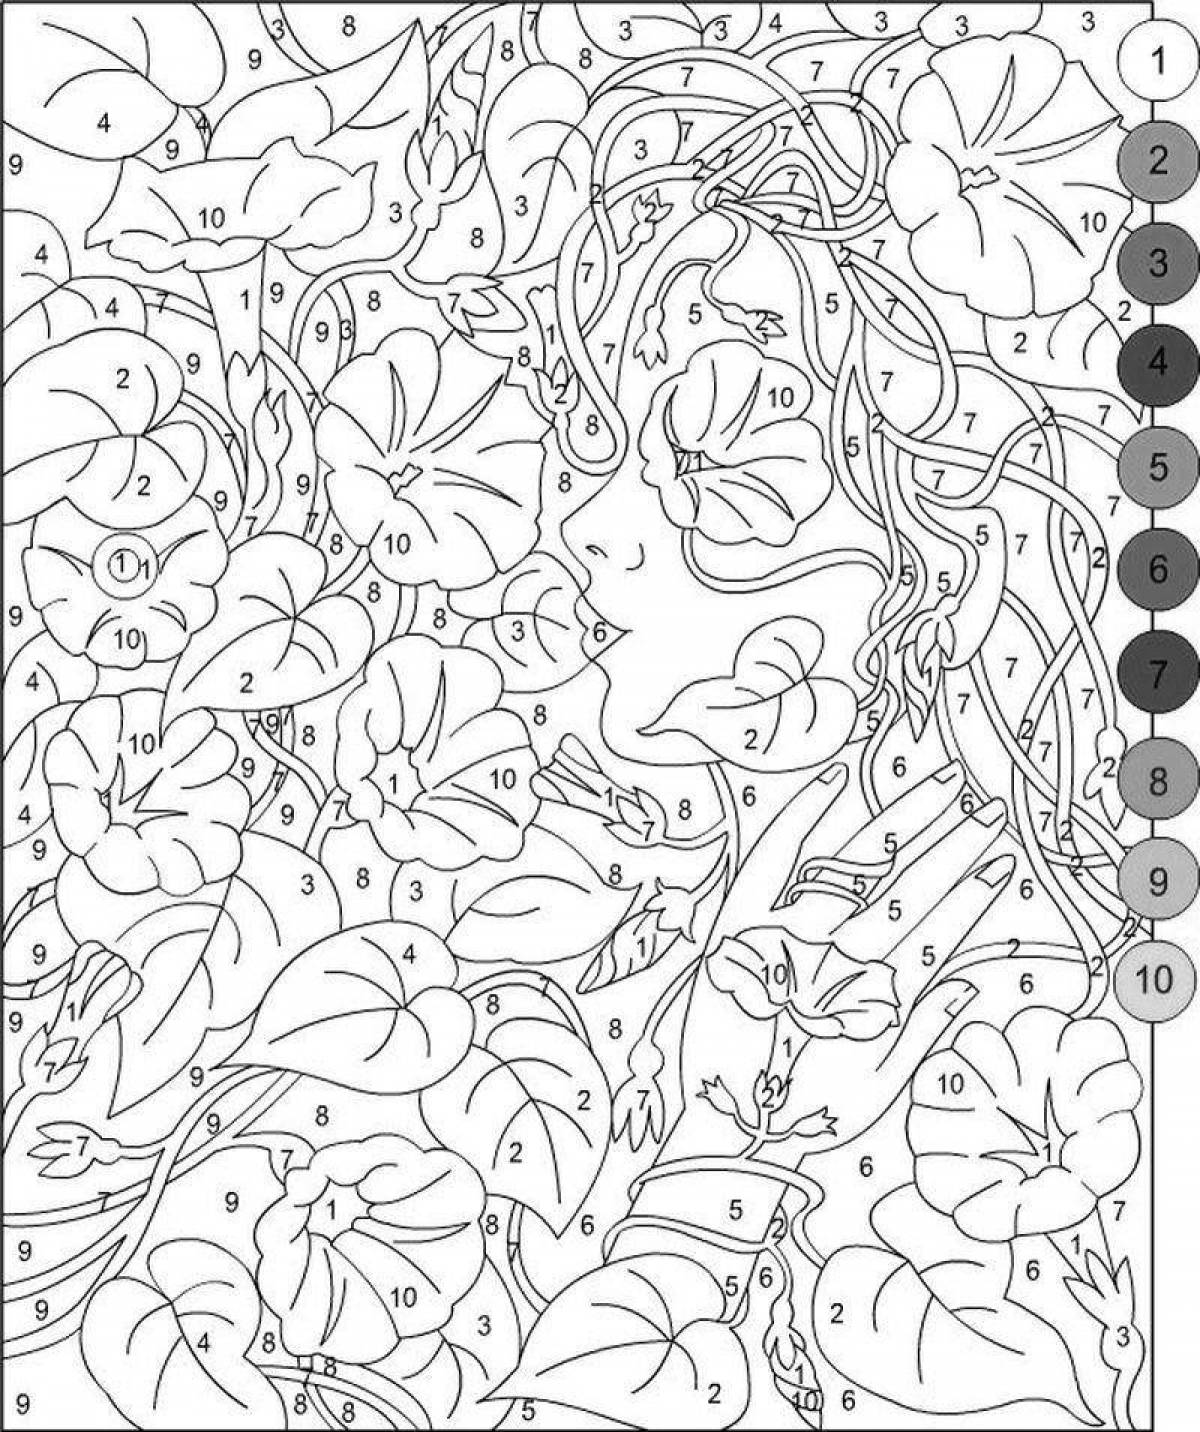 Disney fairy tale coloring by numbers